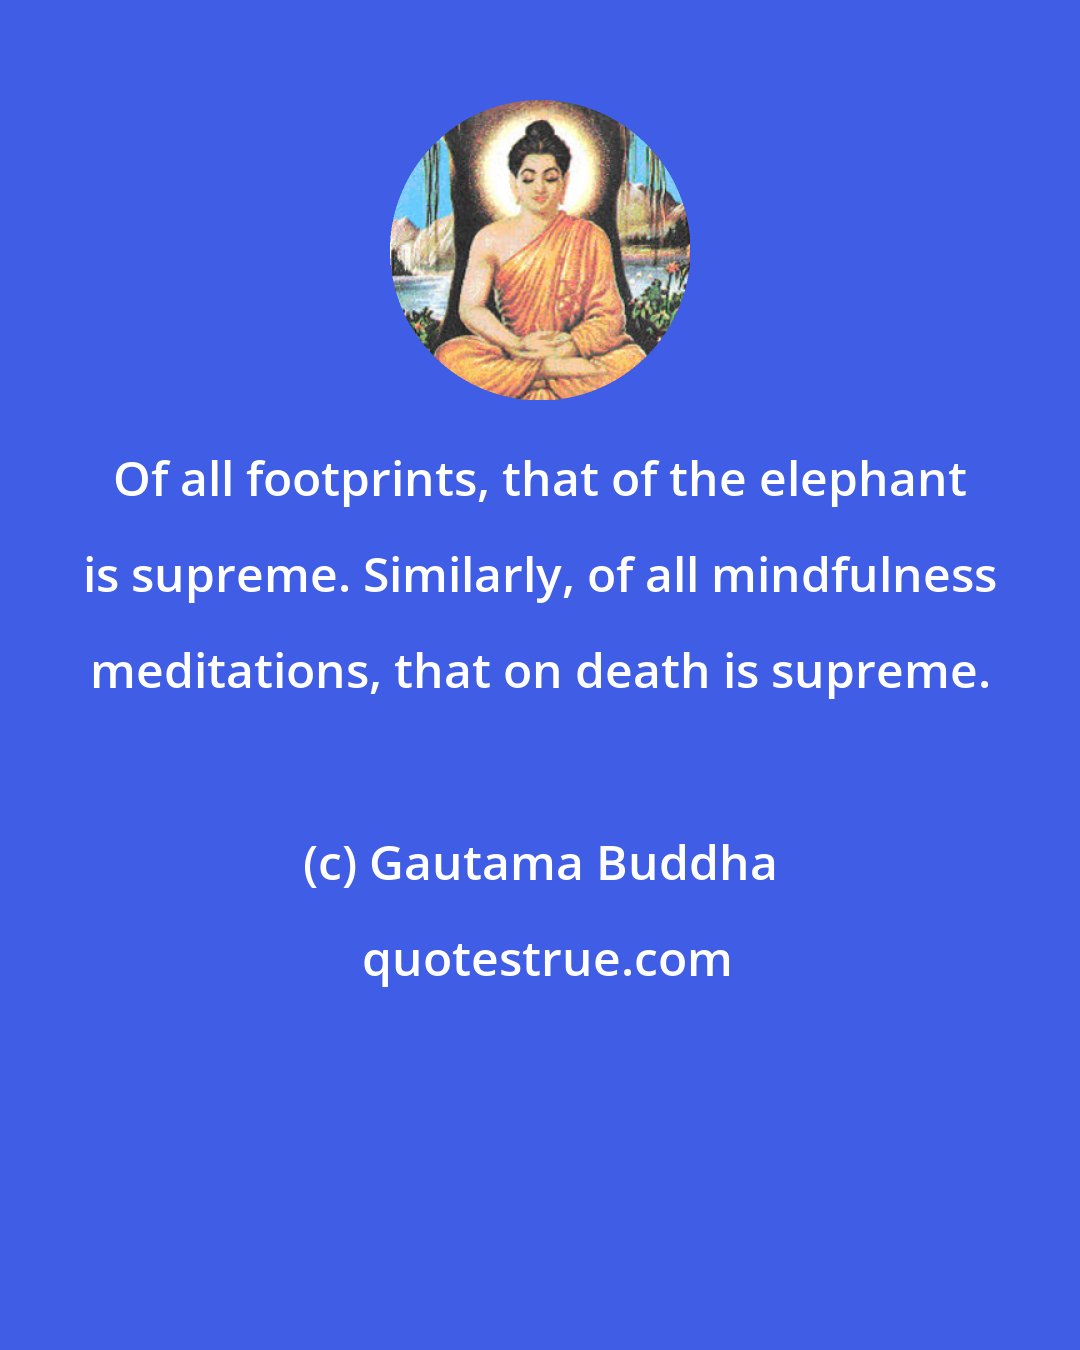 Gautama Buddha: Of all footprints, that of the elephant is supreme. Similarly, of all mindfulness meditations, that on death is supreme.